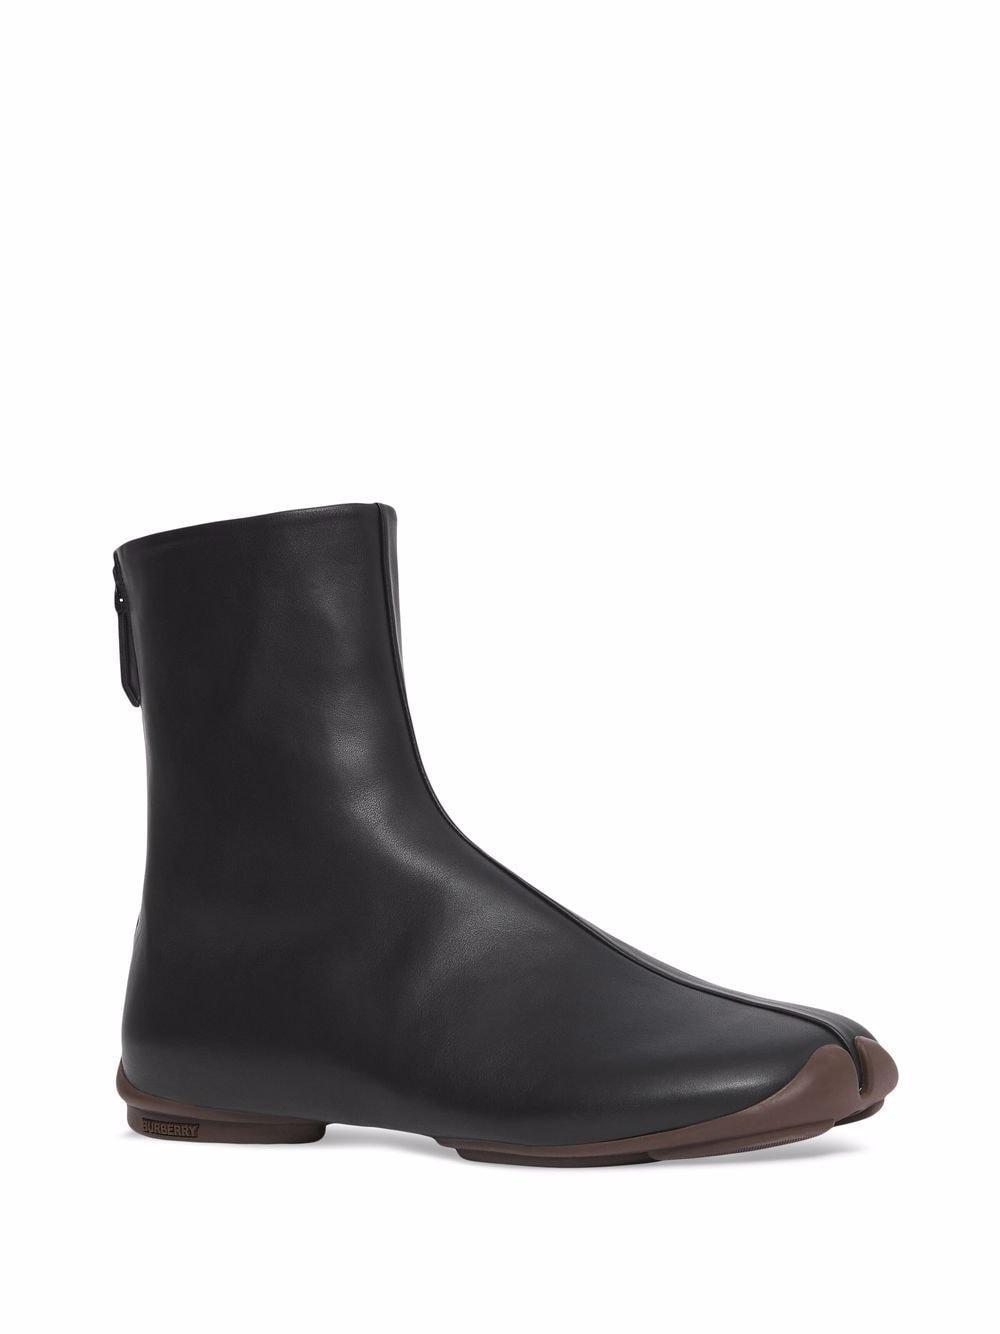 Burberry Phoenix Leather Sock Boots in Black for Men - Save 9% - Lyst